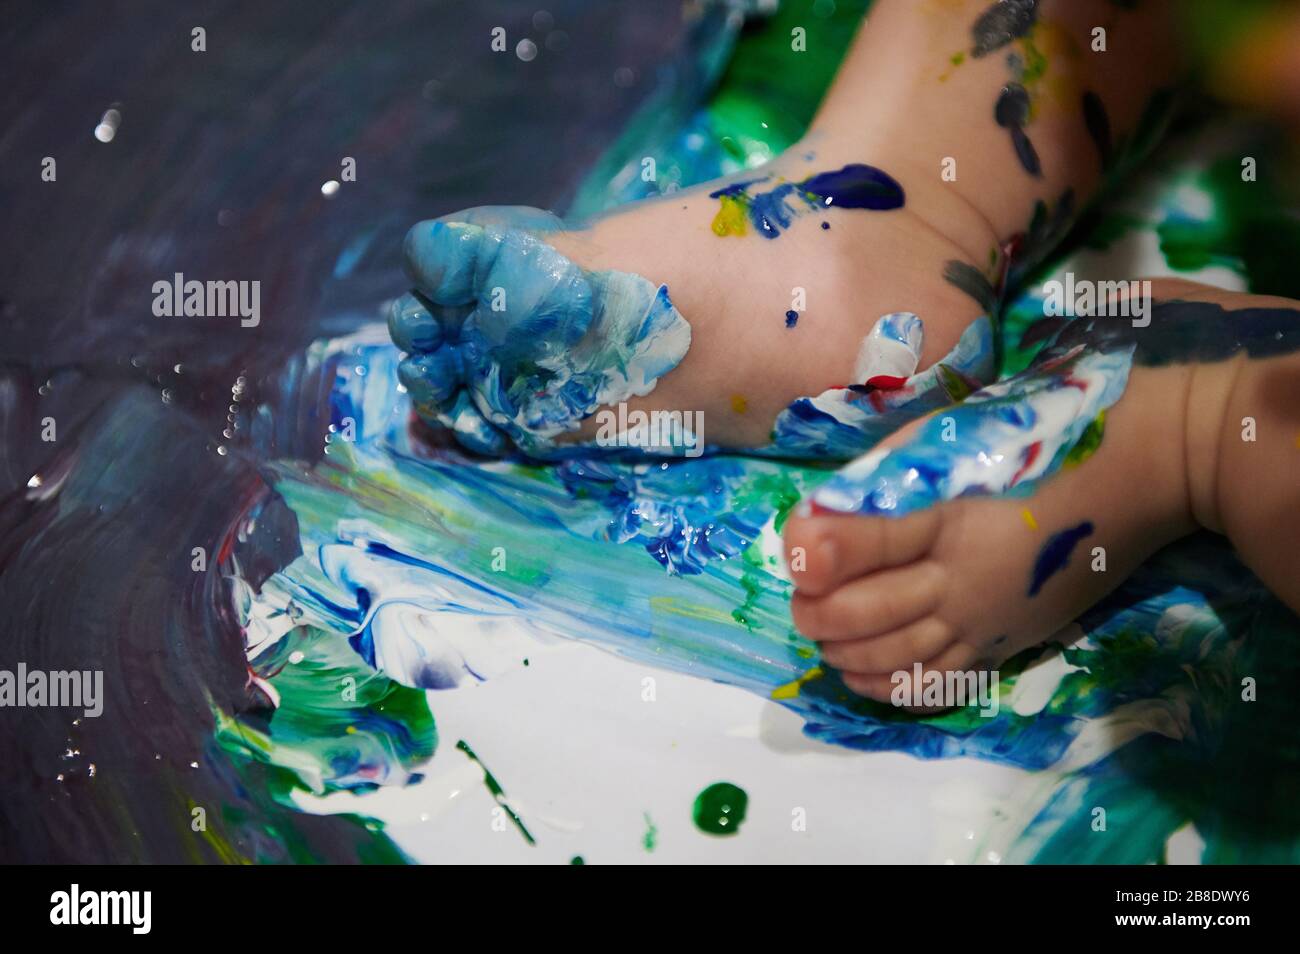 Small baby foot dirty of wet paint close up view Stock Photo